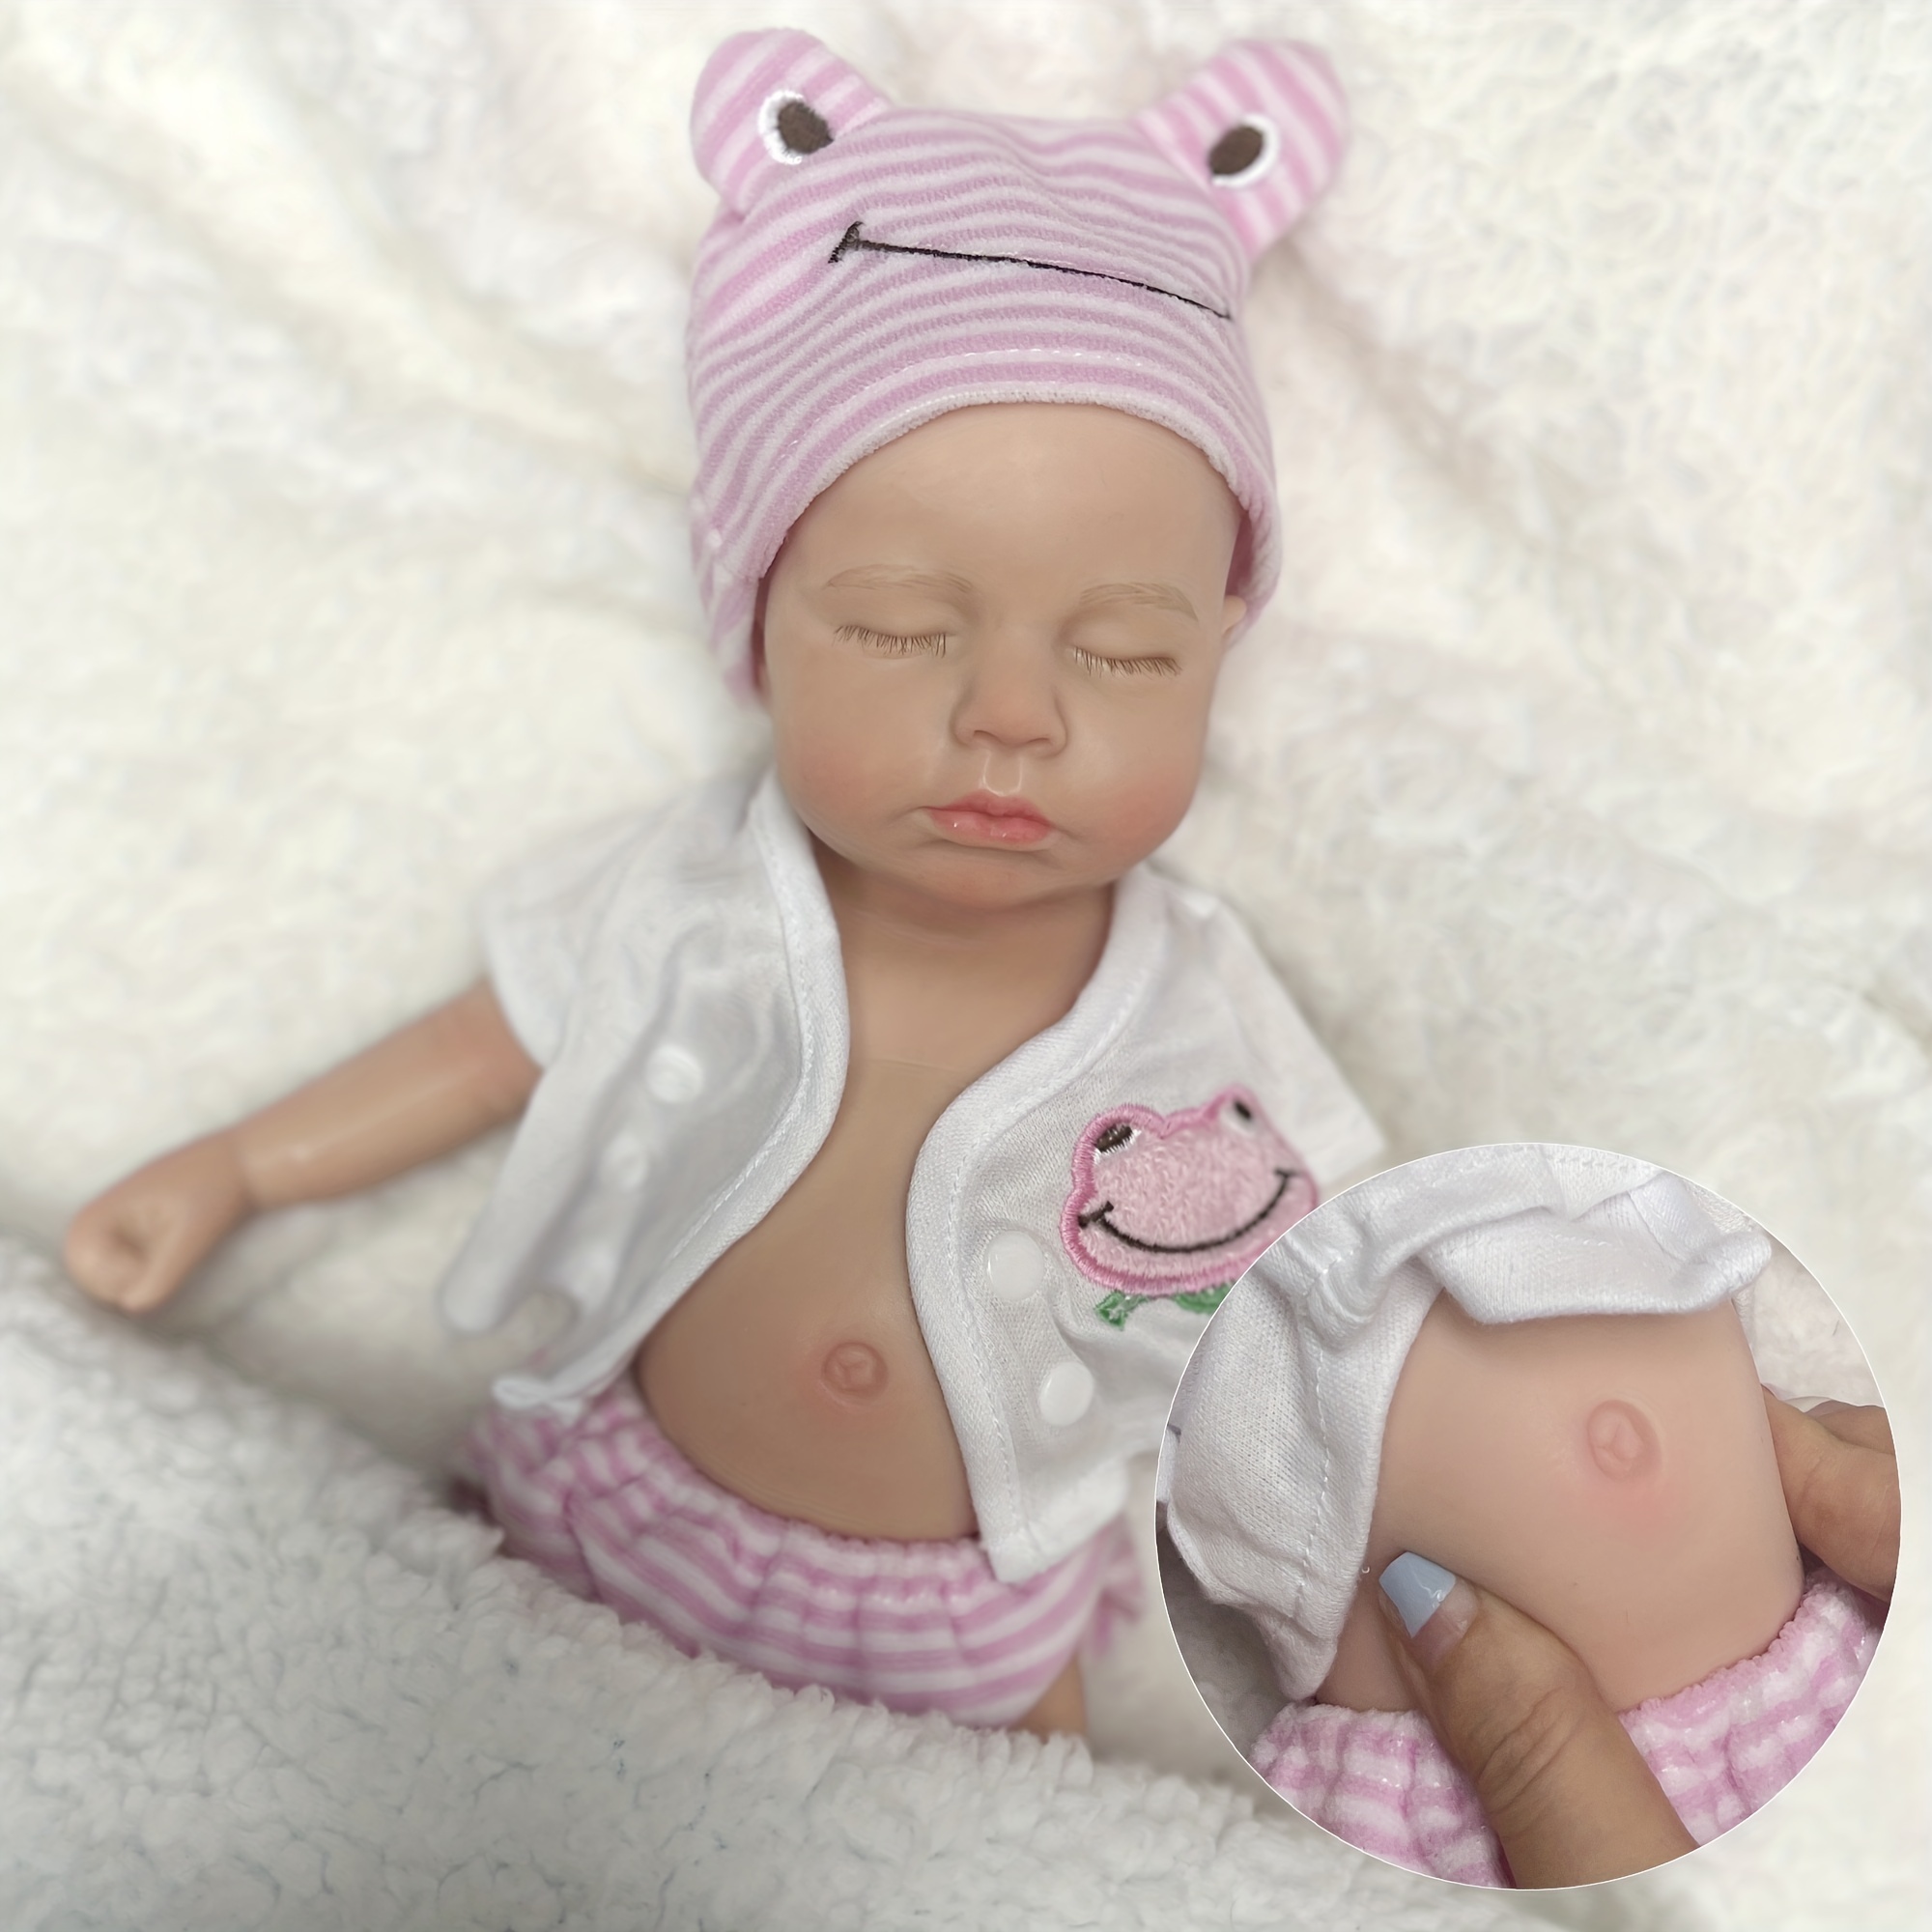 28cm Soft Full Body Solid Silicone Reborn Dolls Handmade Painted